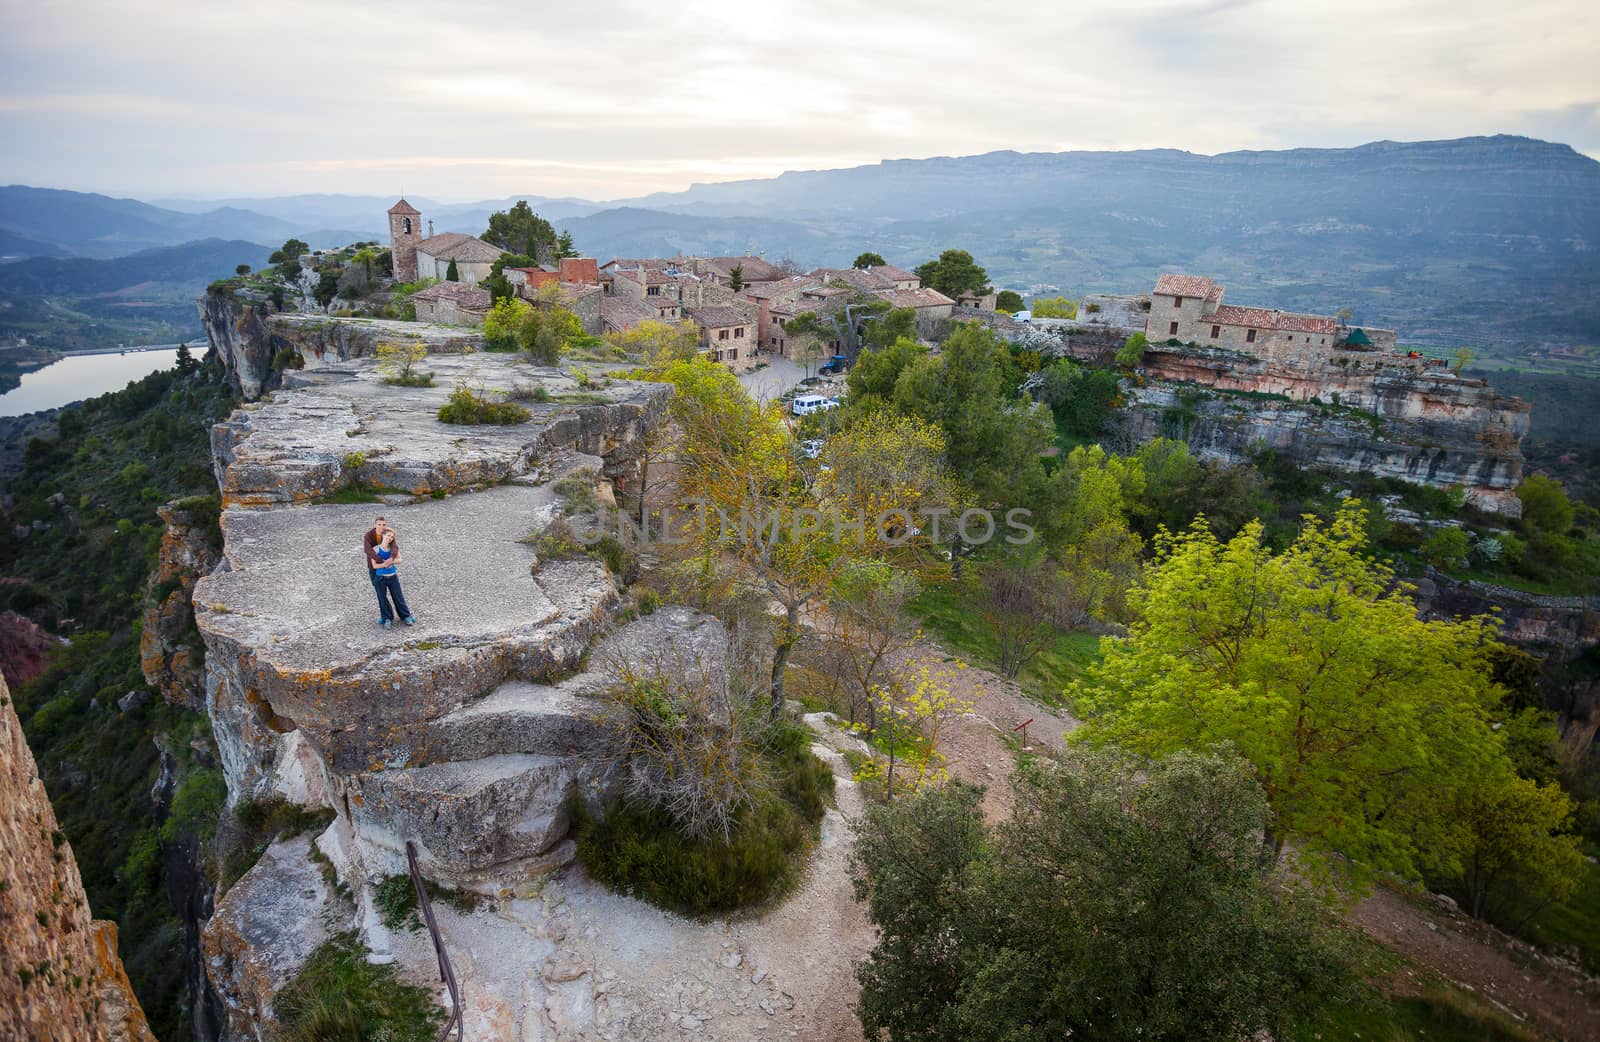 Couple standing on cliff near old village Siurana by photobac